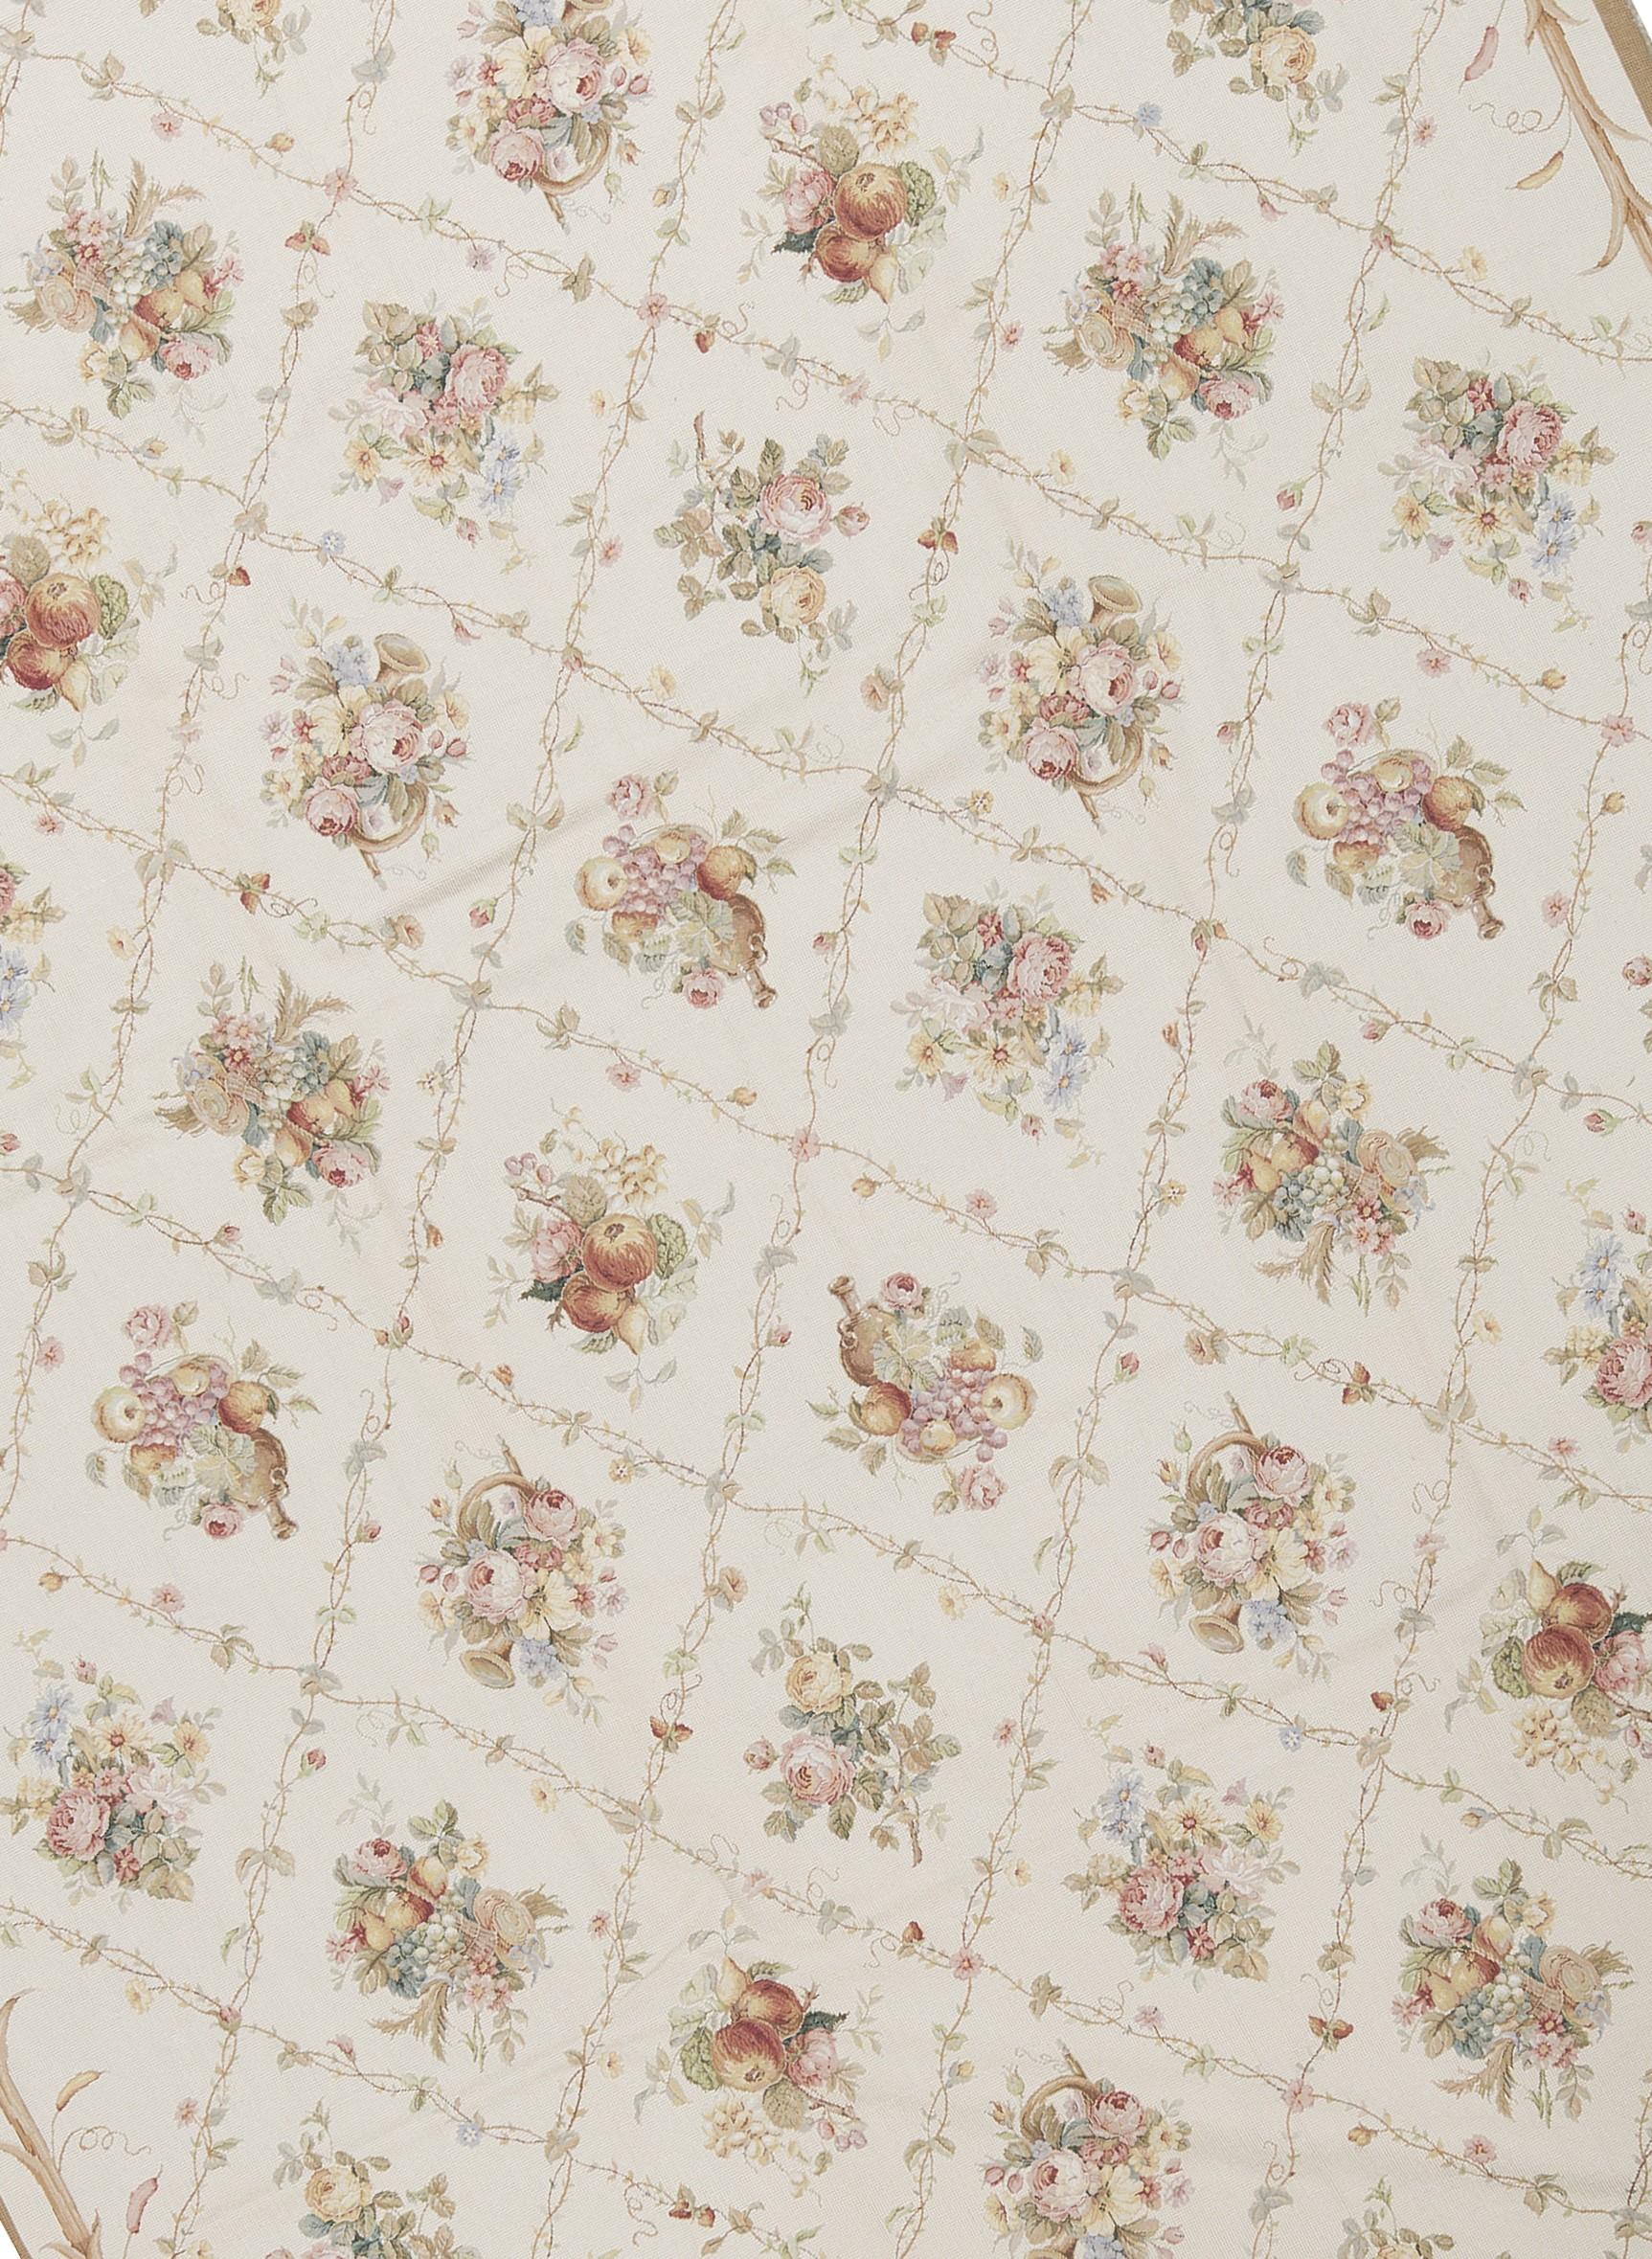 Handwoven recreation of the Classic French flat-weave Aubusson rugs that have been found in the finest homes and palaces since the late 17th century. Size: 11' 1'' x 16' 2''.